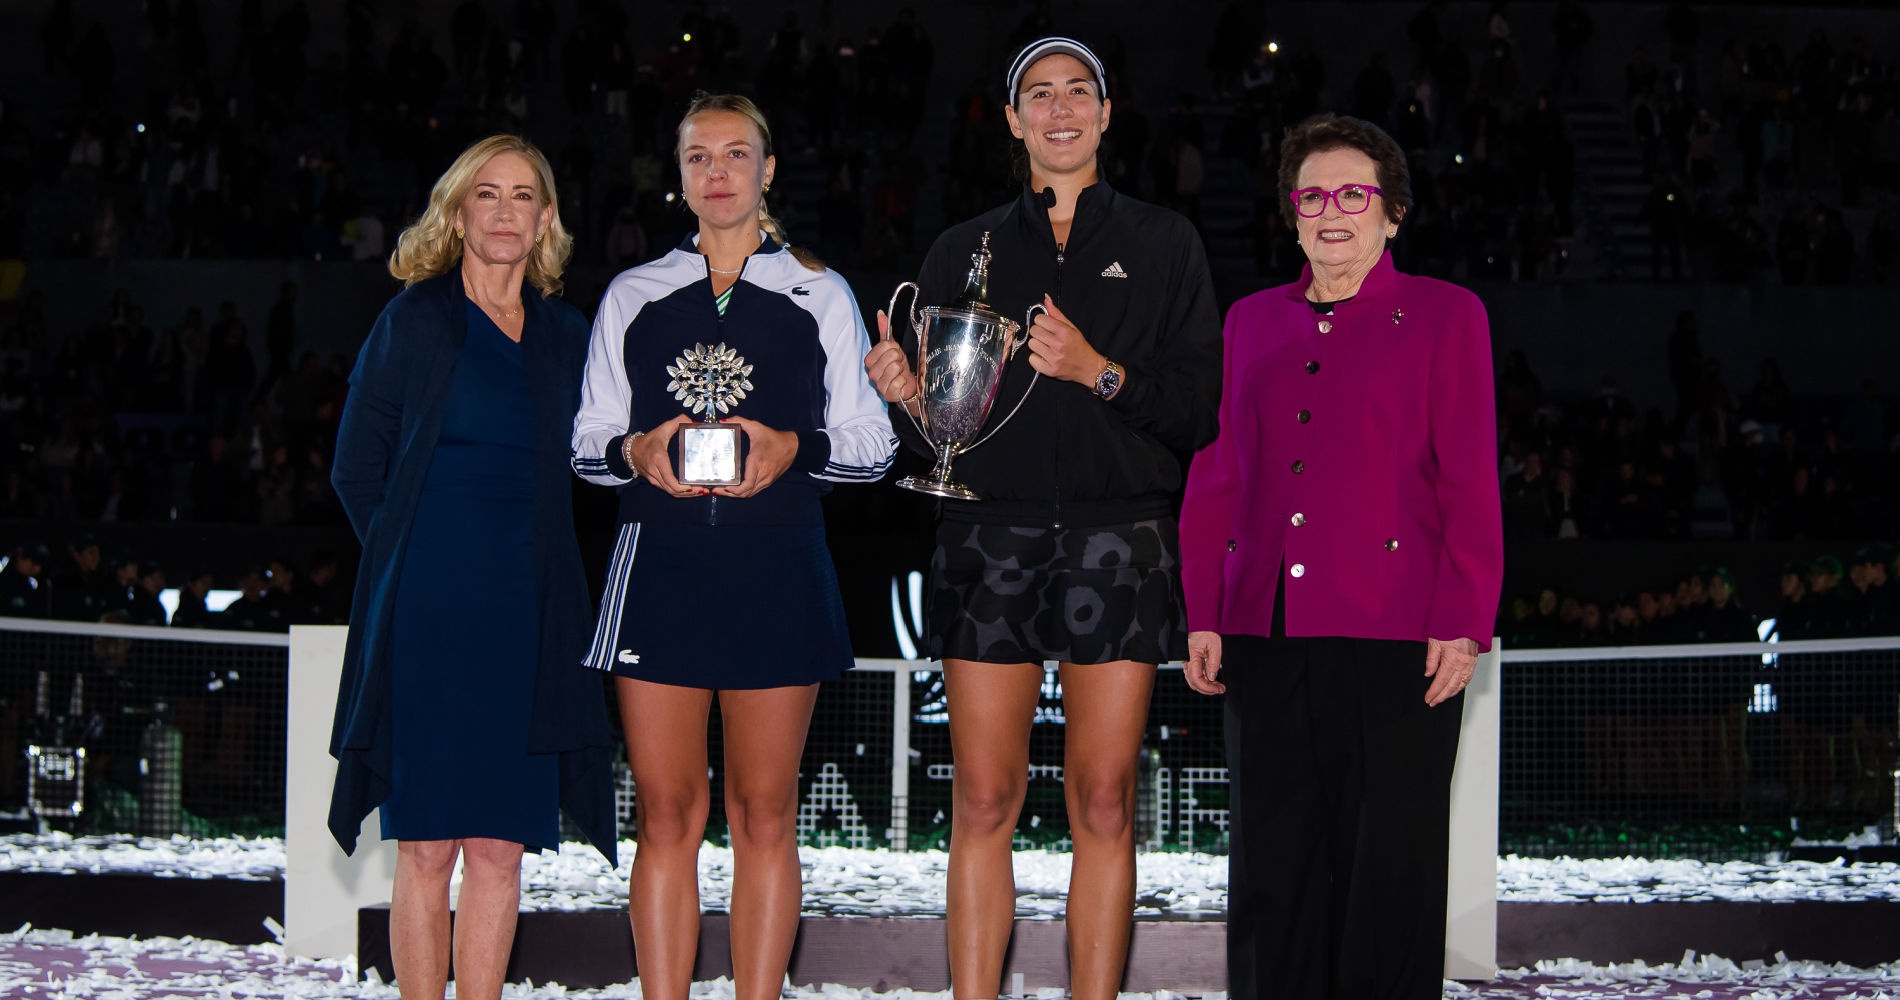 Tennis Everything you need to know about the 2022 WTA Finals